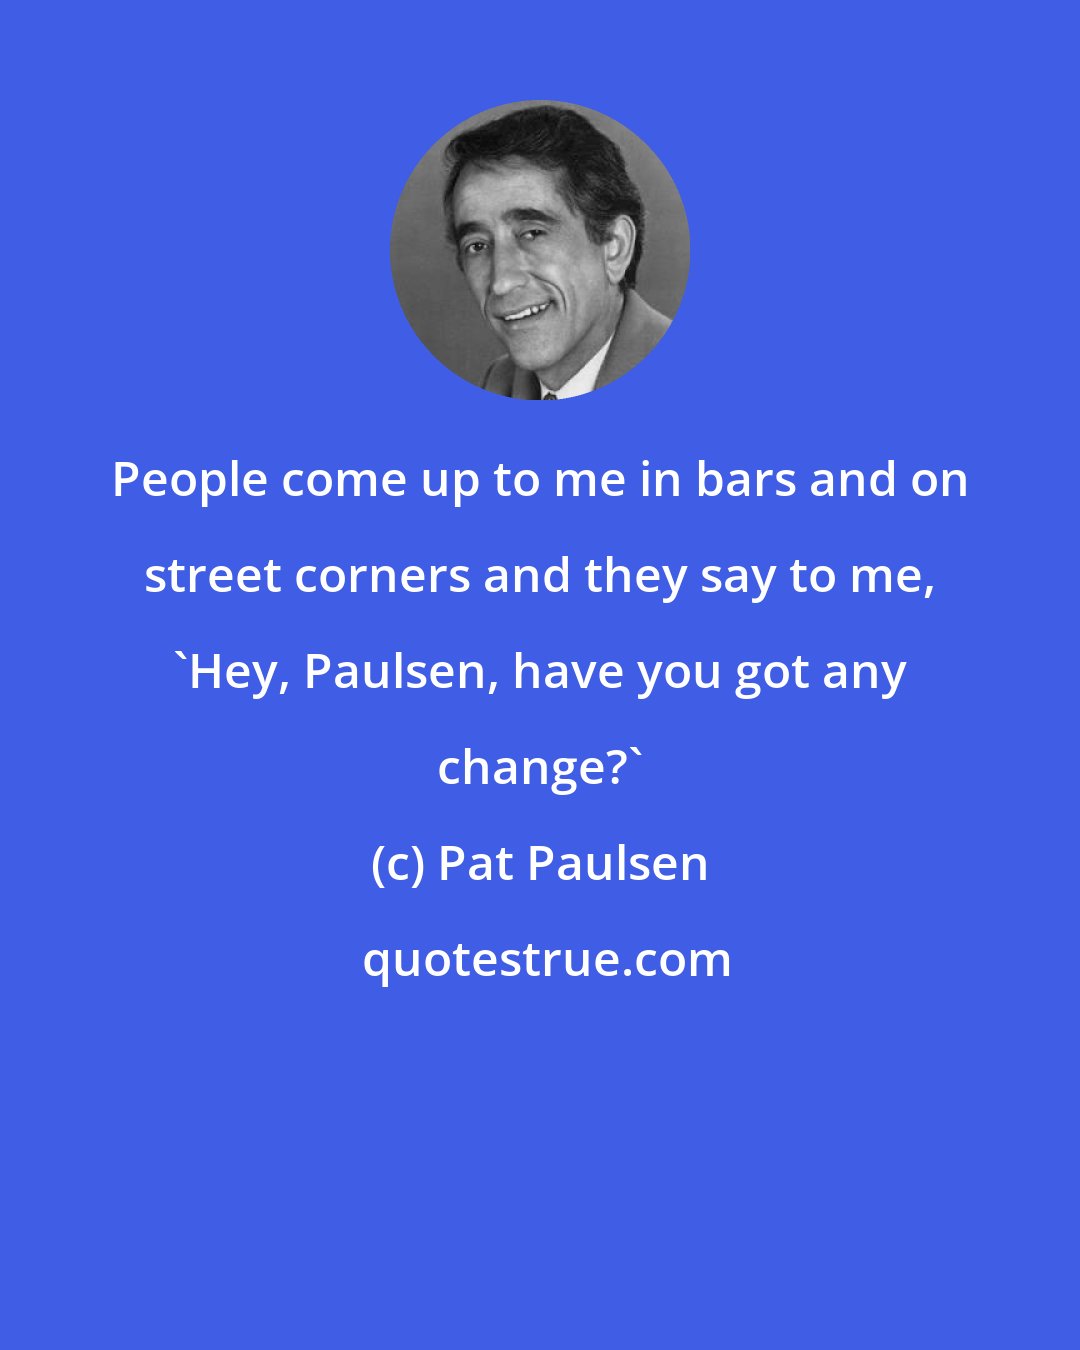 Pat Paulsen: People come up to me in bars and on street corners and they say to me, 'Hey, Paulsen, have you got any change?'